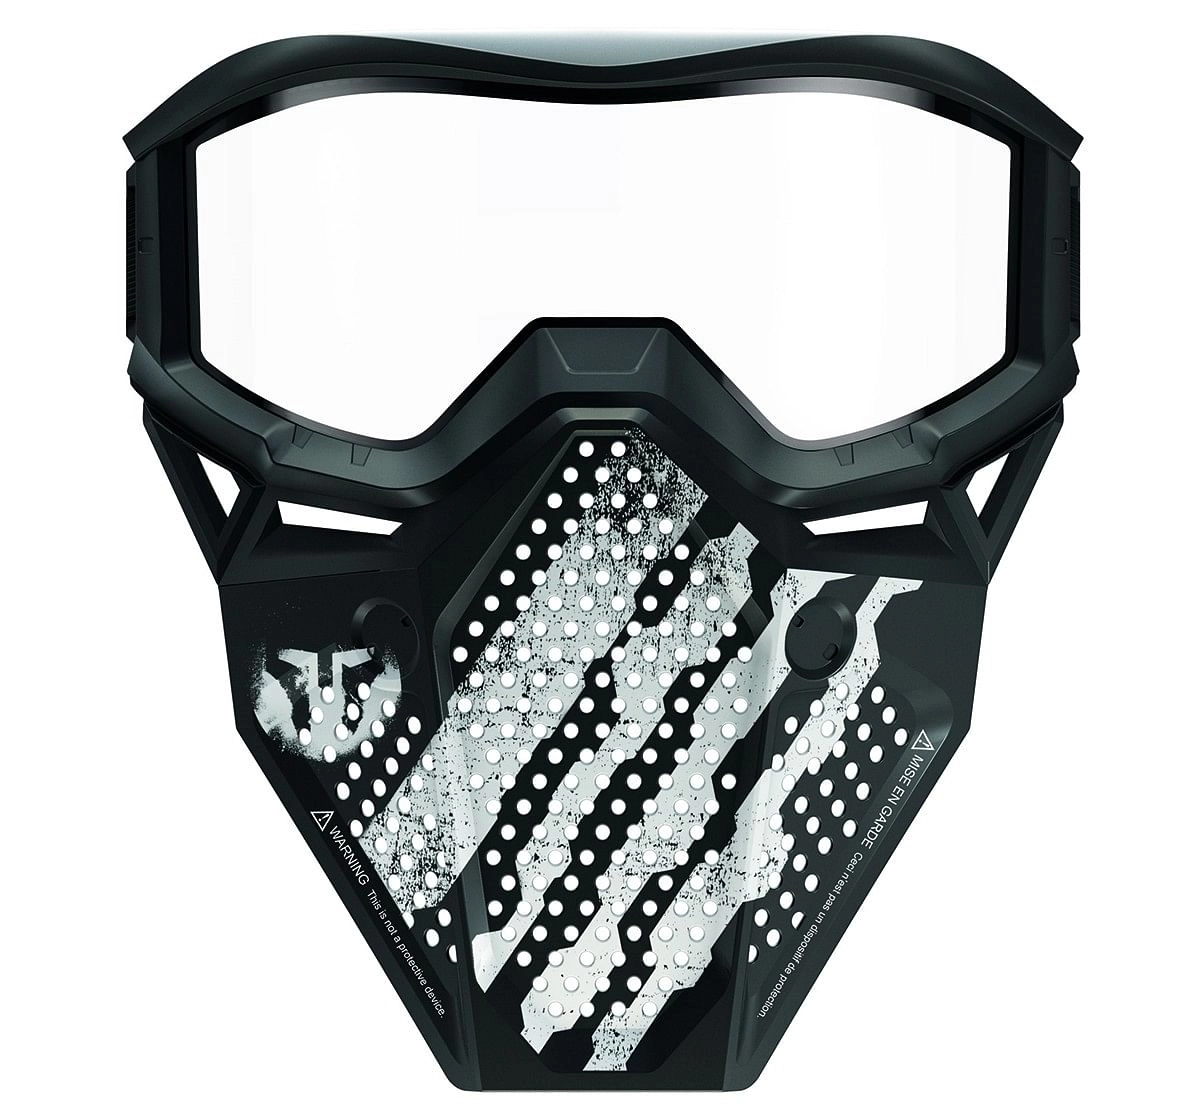 NERF Rival Phantom Corps Face Mask, White, 14Y+